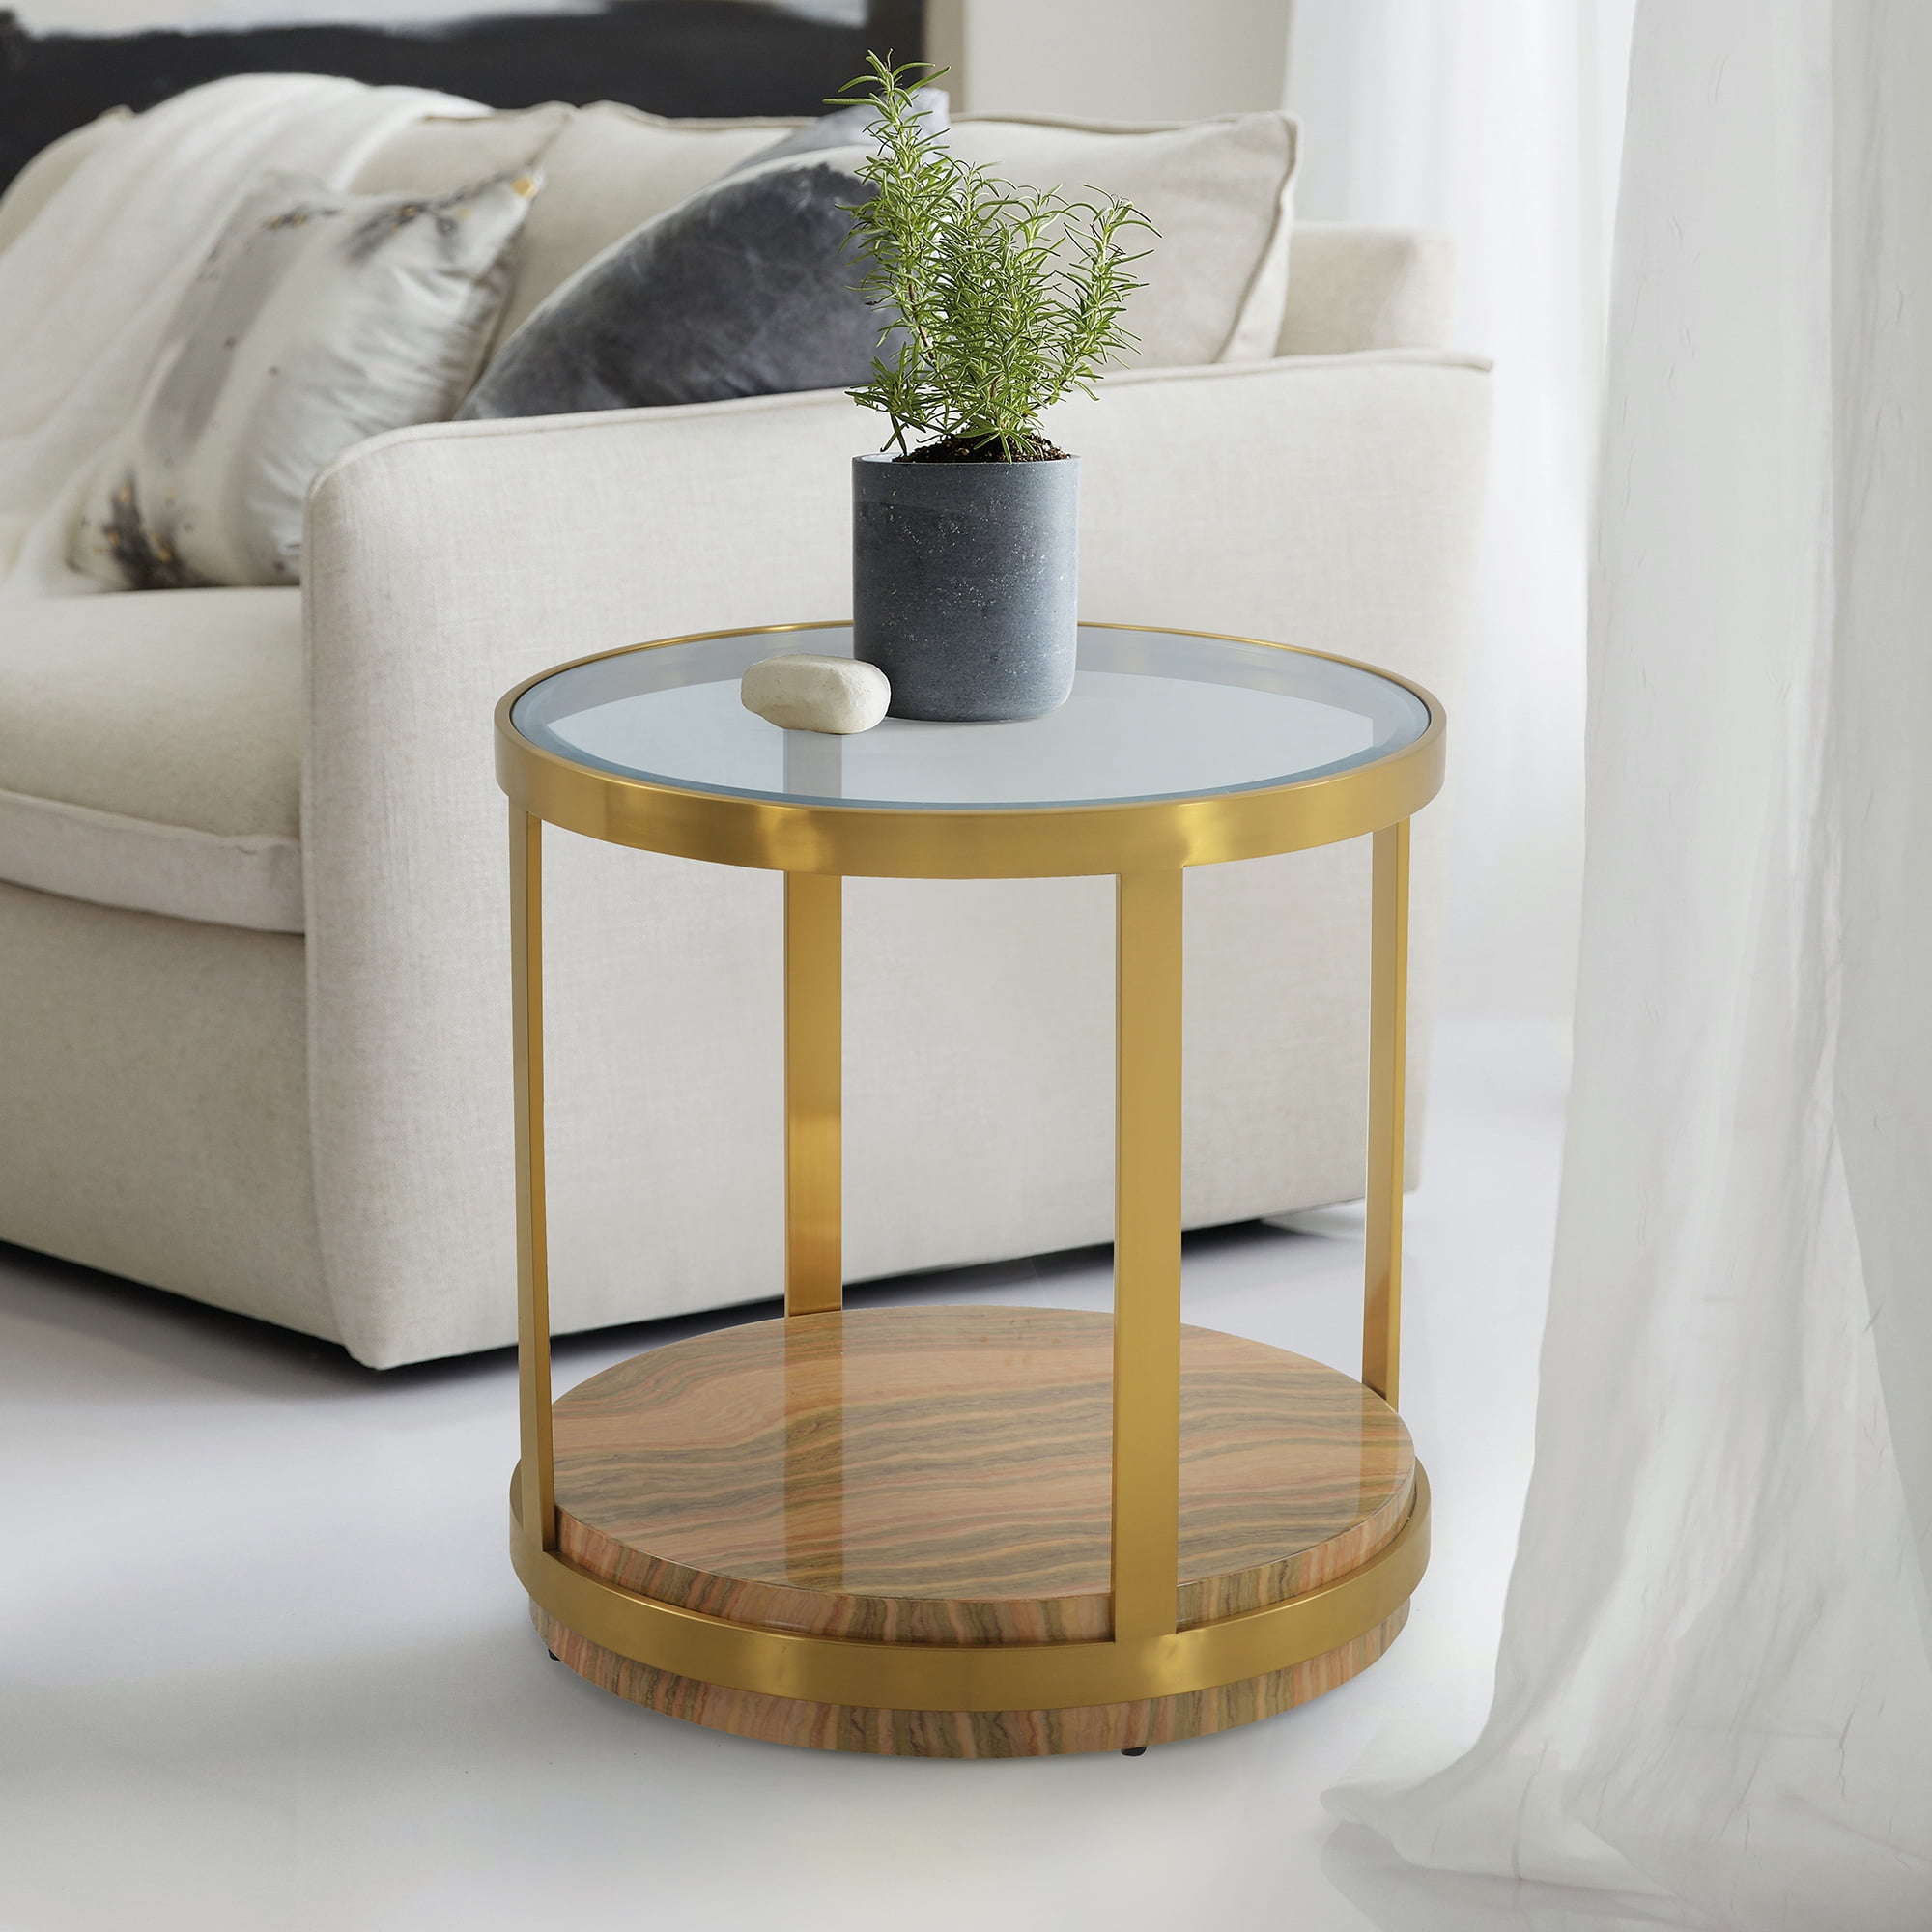 Mxfurhawa Round Coffee Table Gold Modren Accent Table Tempered Glass Side Table for Home Living Room Mirrored Top/Gold Frame